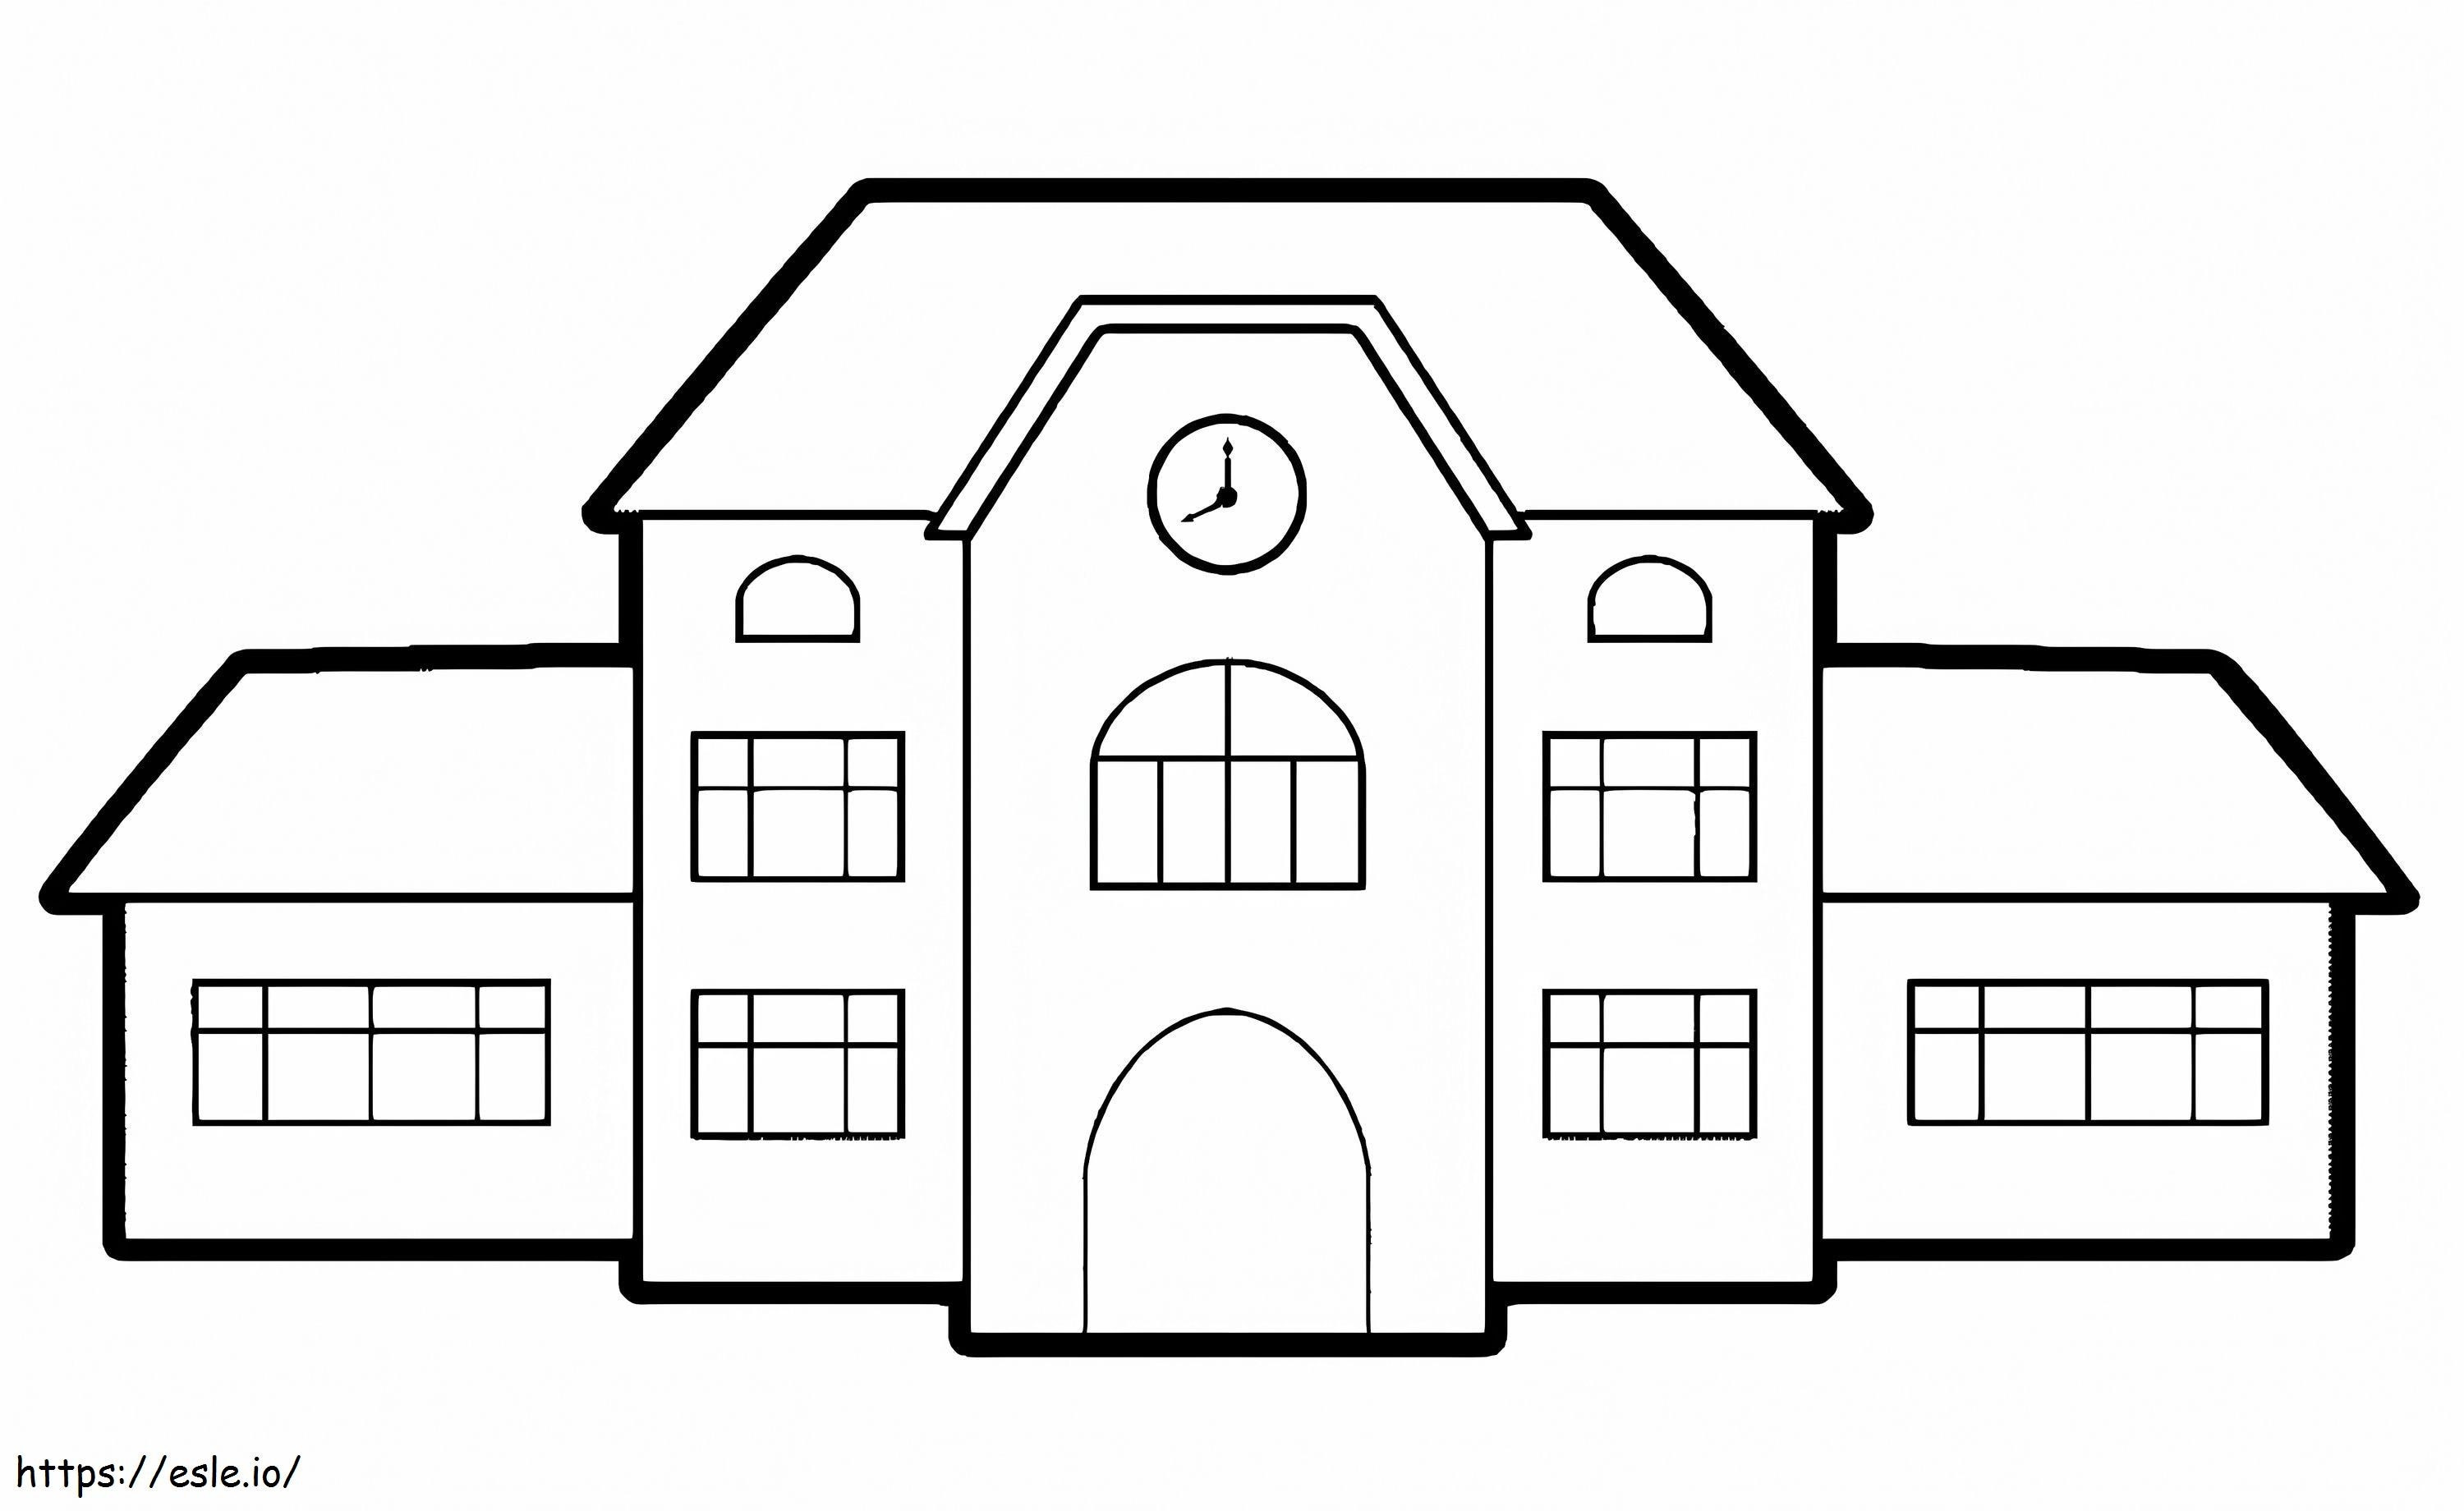 Basic School Building coloring page